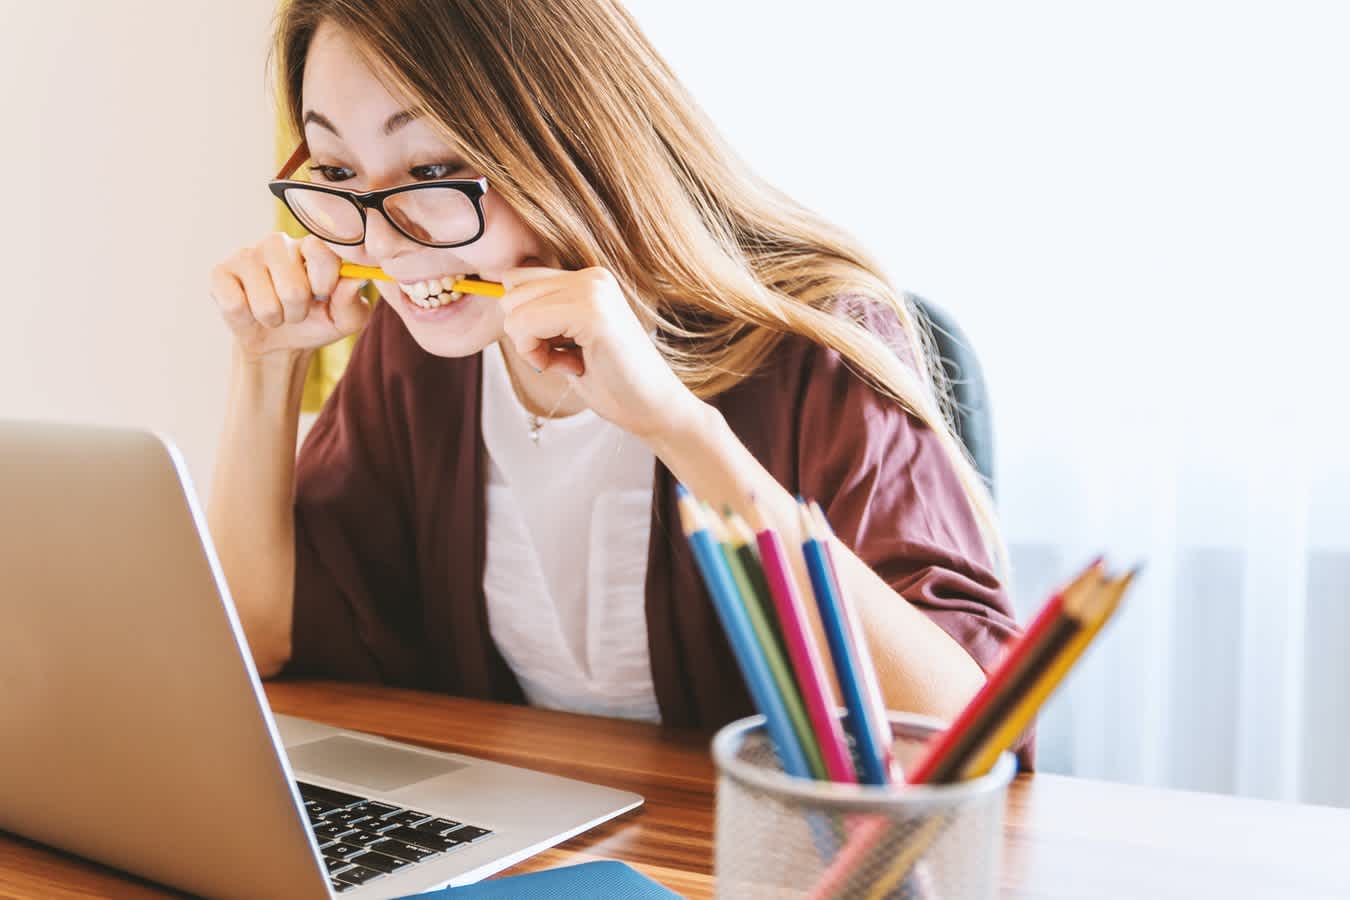 Woman biting on yellow pencil looking at laptop